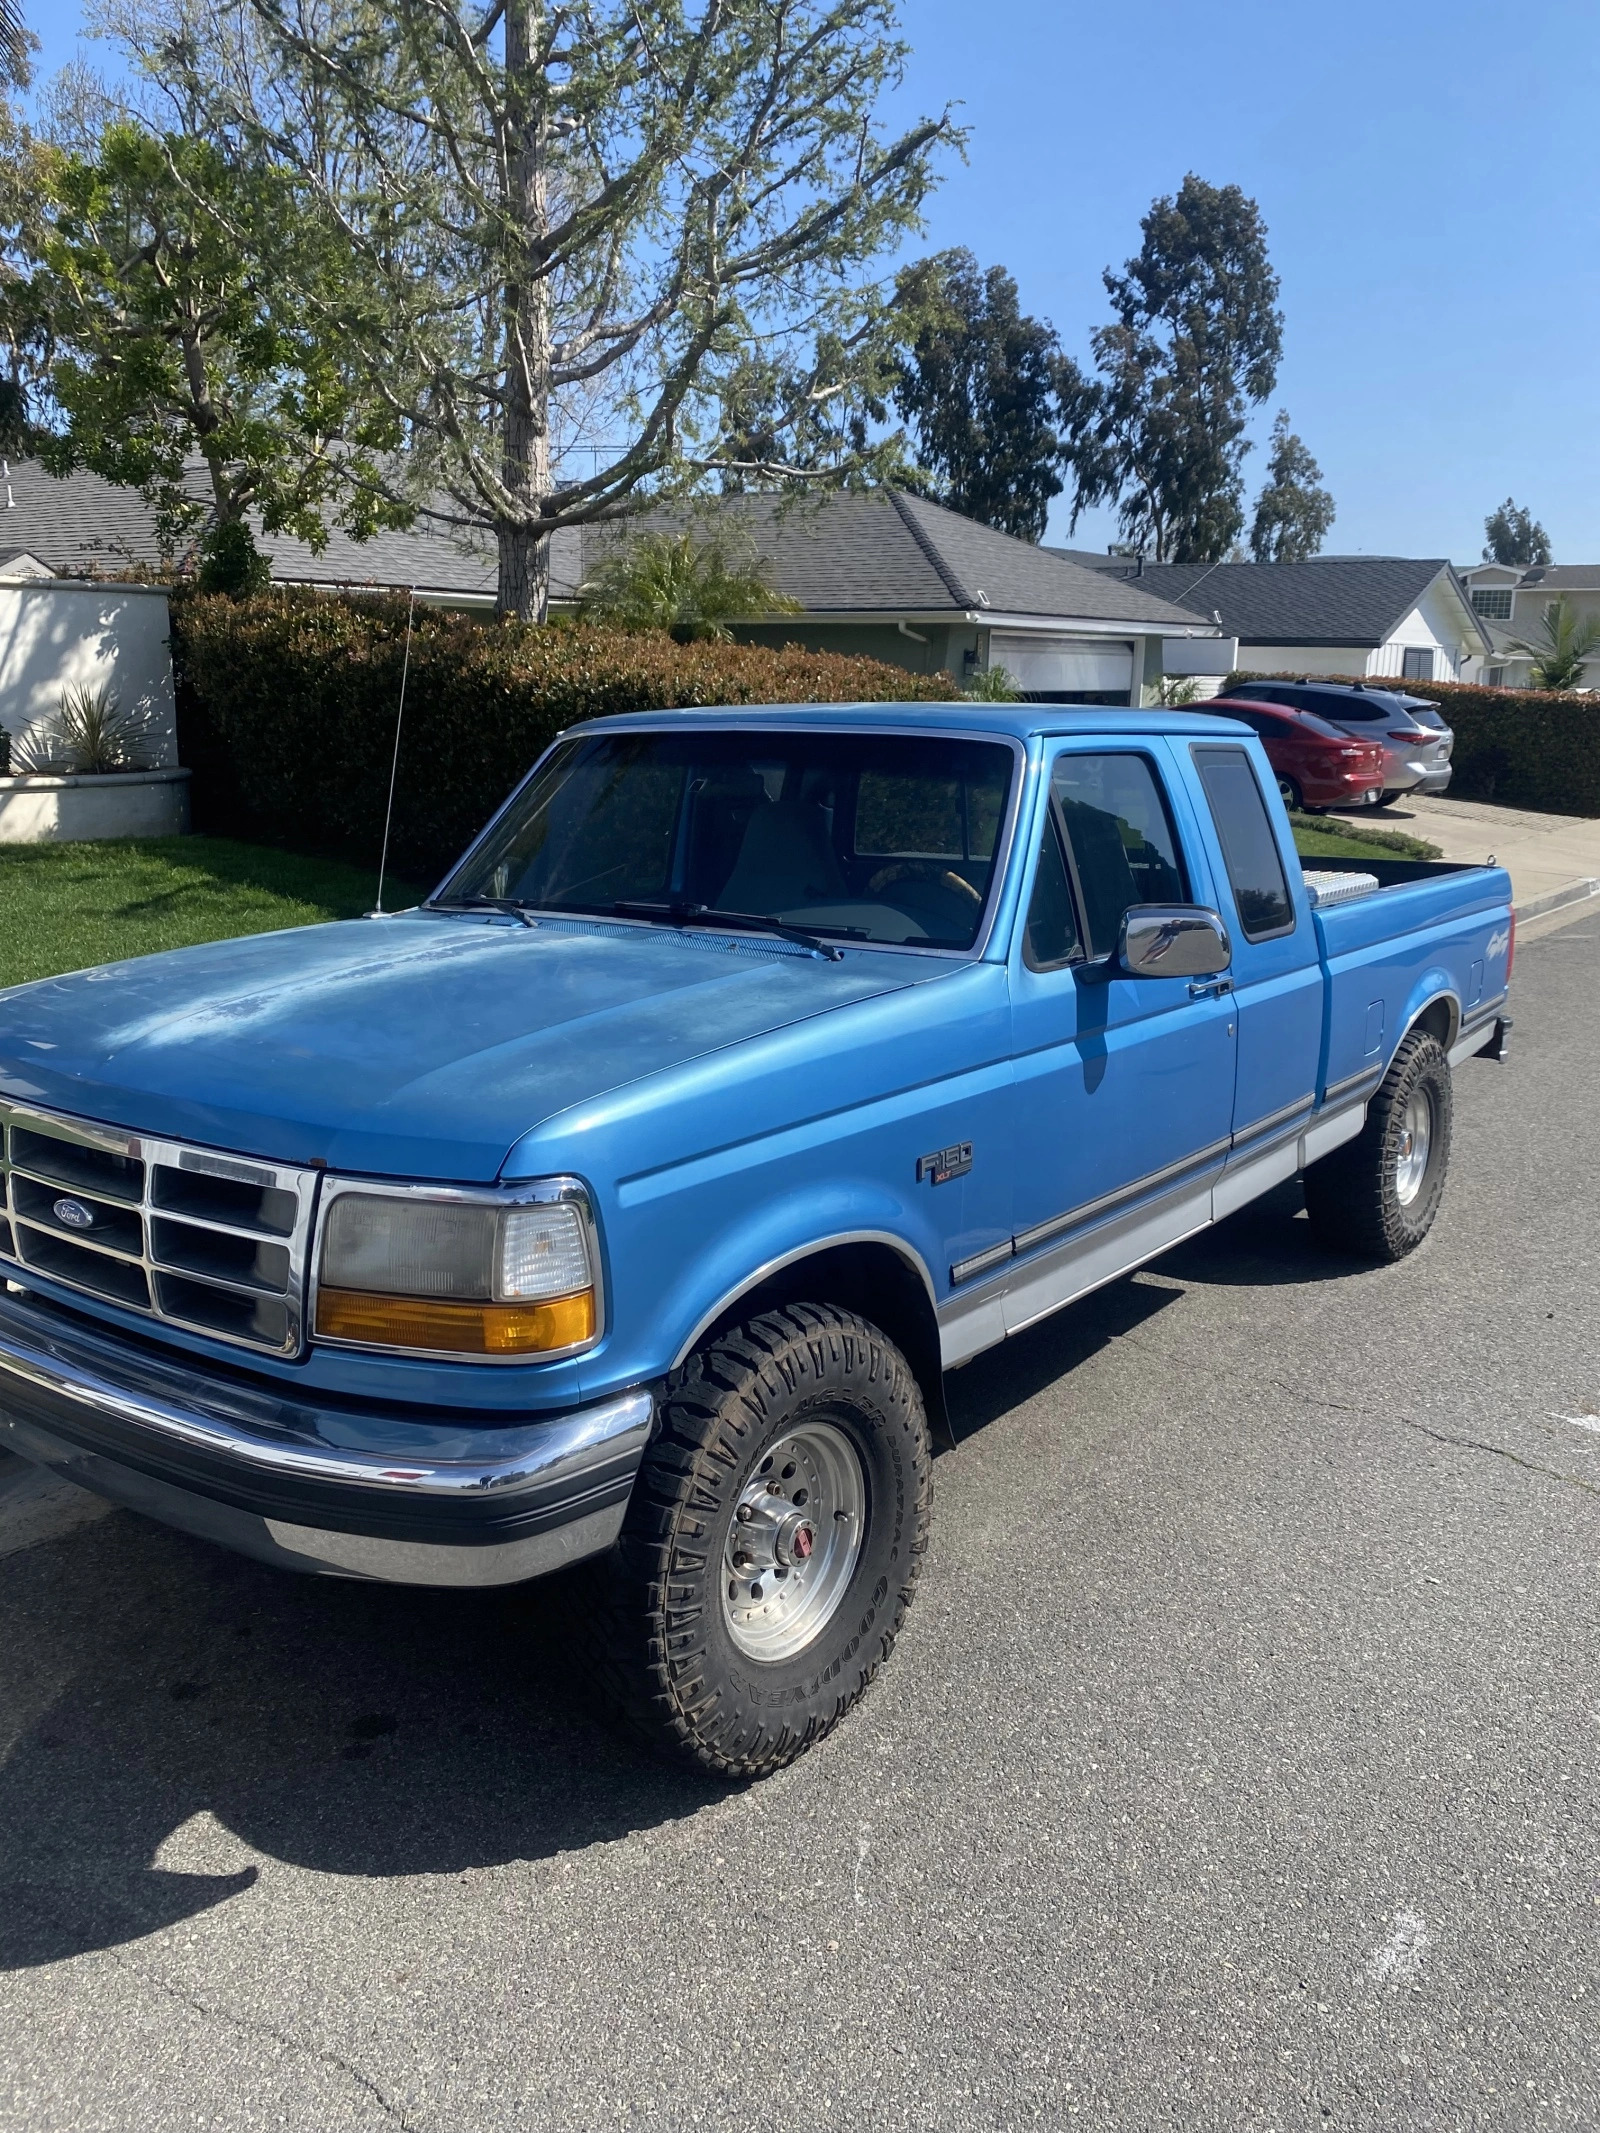 For Sale: 1992 Ford-150 extended cab 4x4 obs new motor good condition  - photo0